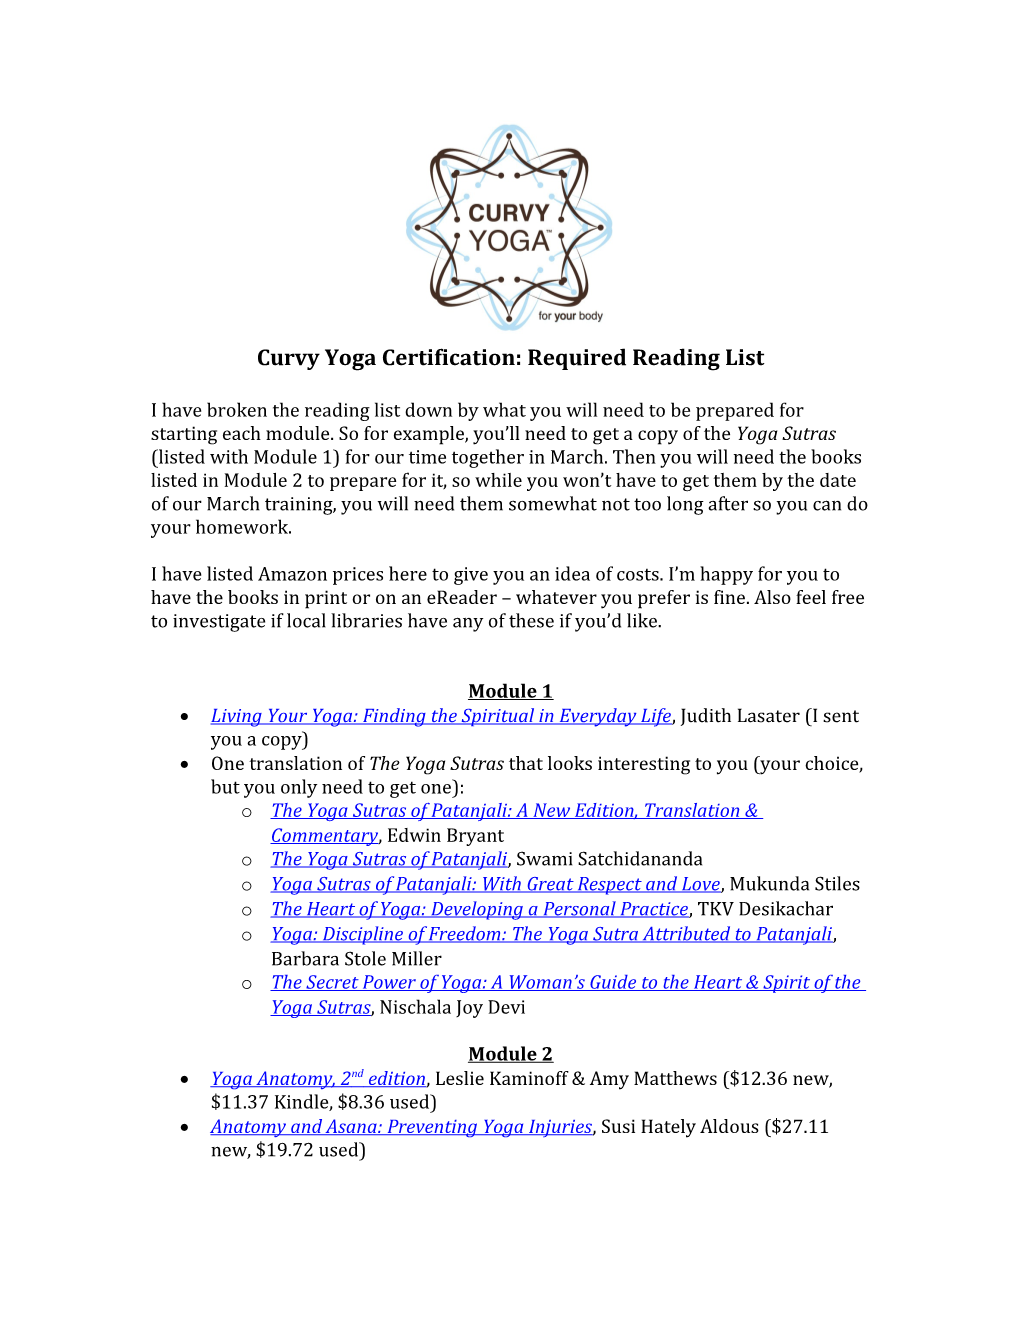 Curvy Yoga Certification: Required Reading List